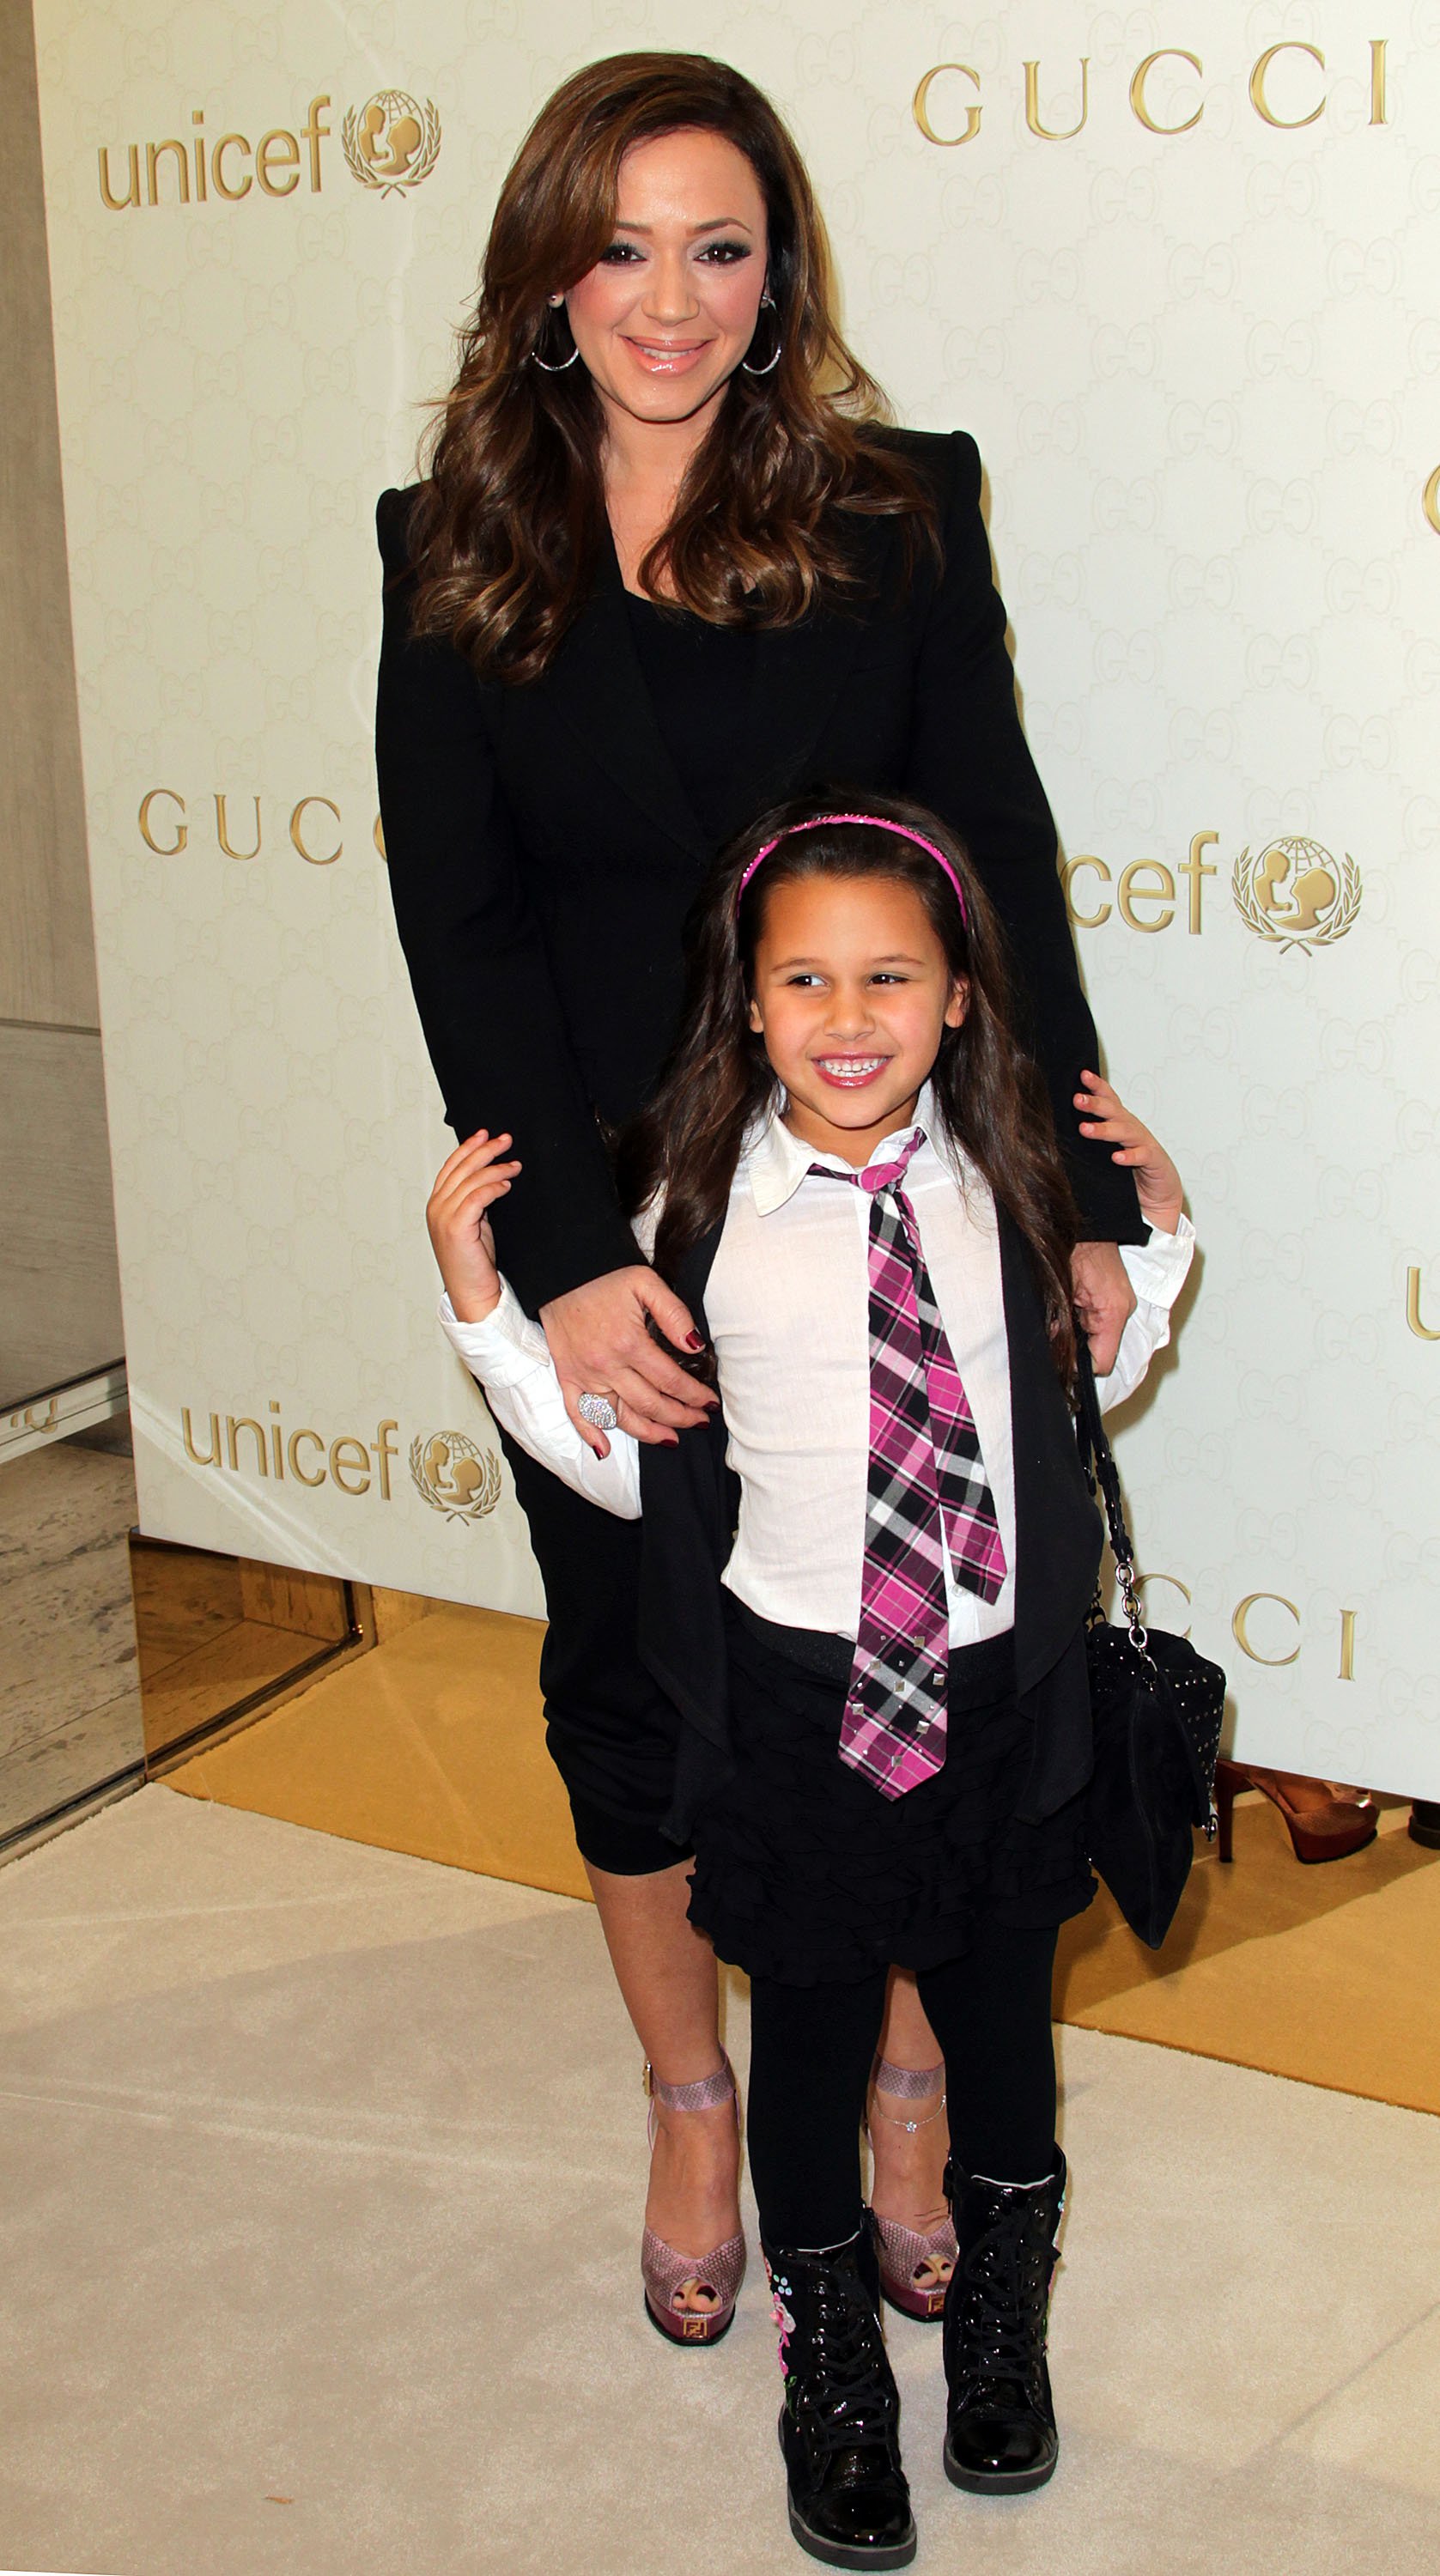 Leah Remini and Sofia Bella Pagan at the Launch of the Gucci Children's Collection on November 20, 2010 | Source: Getty Images